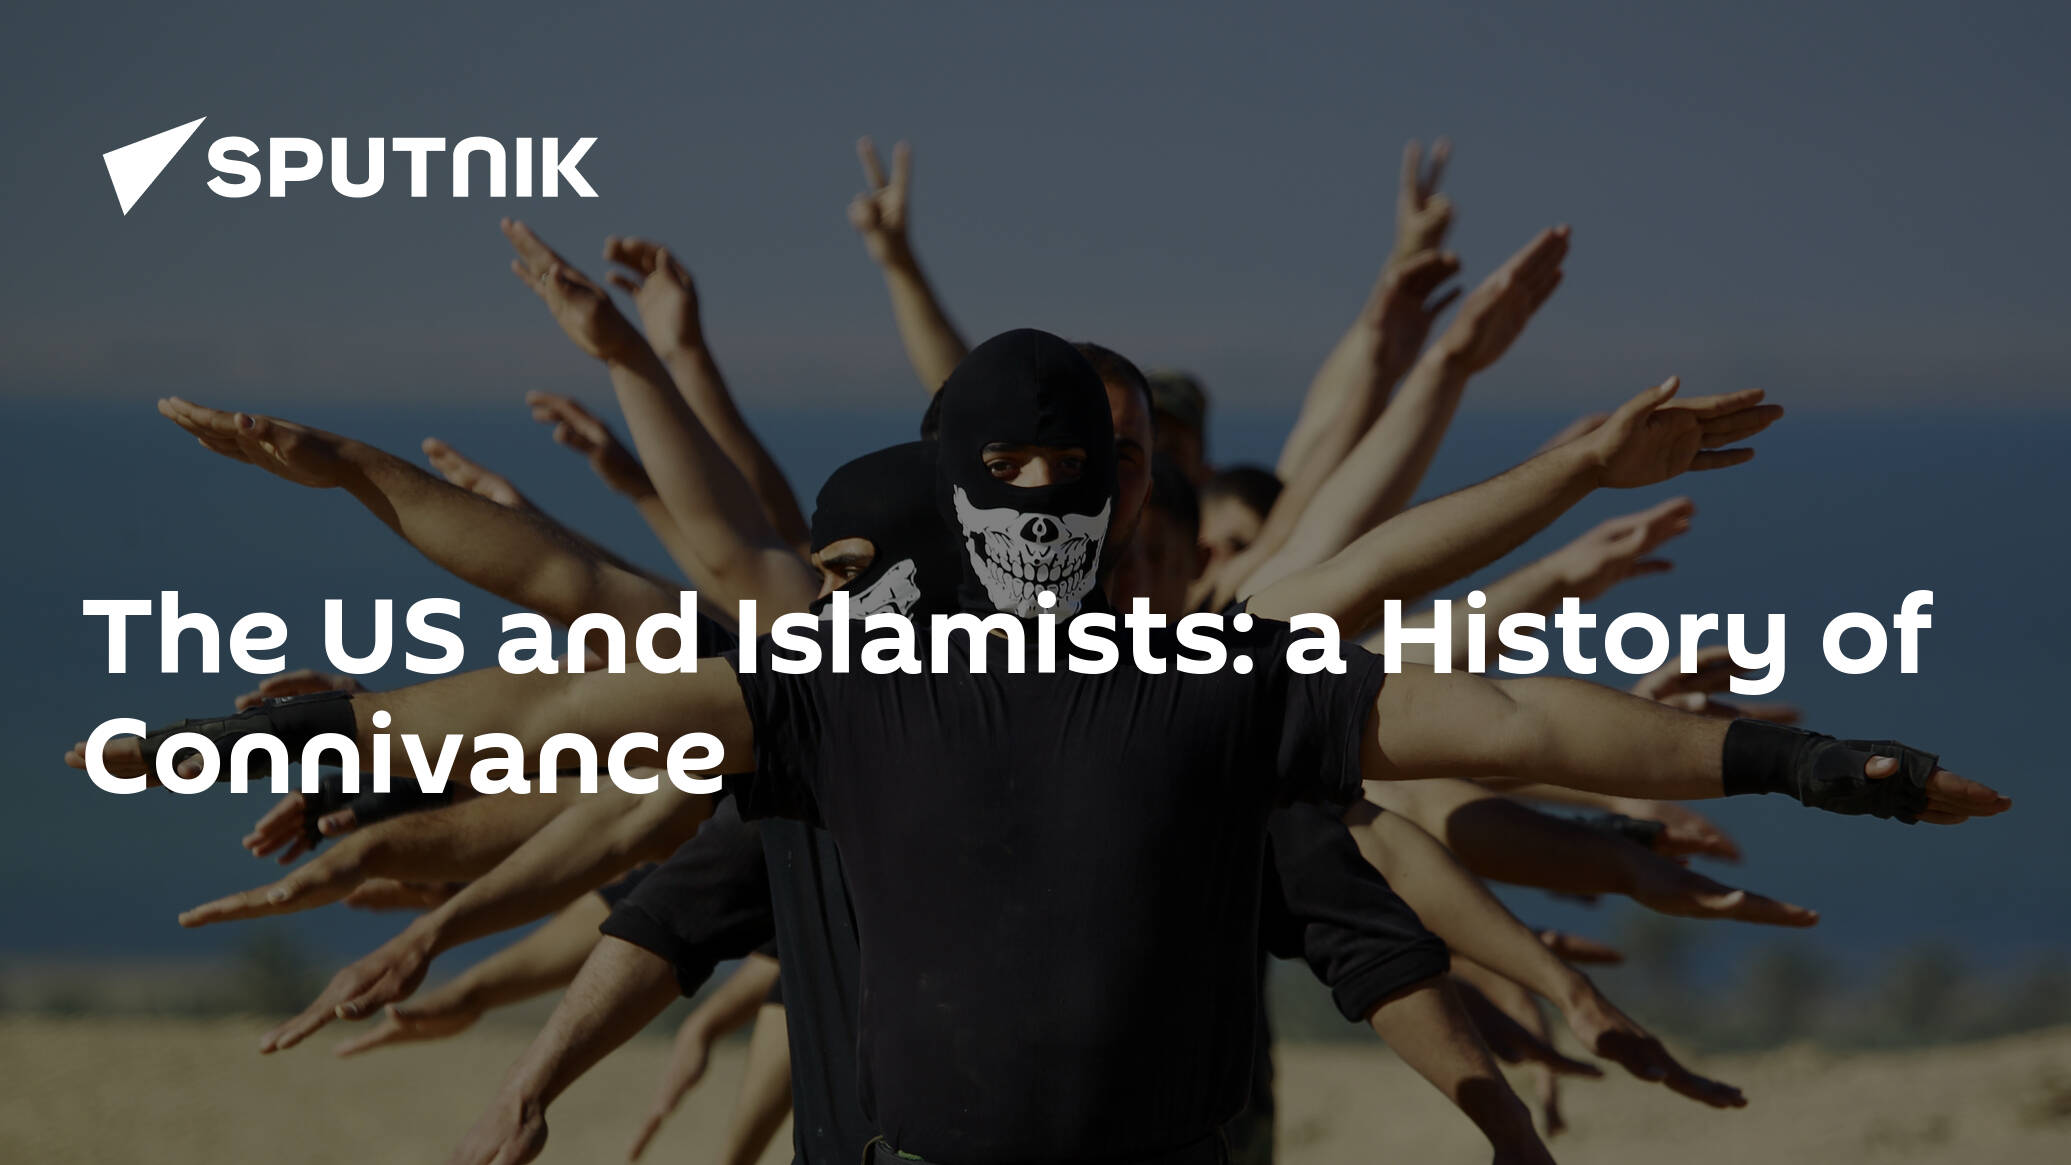 The US and Islamists a History of Connivance